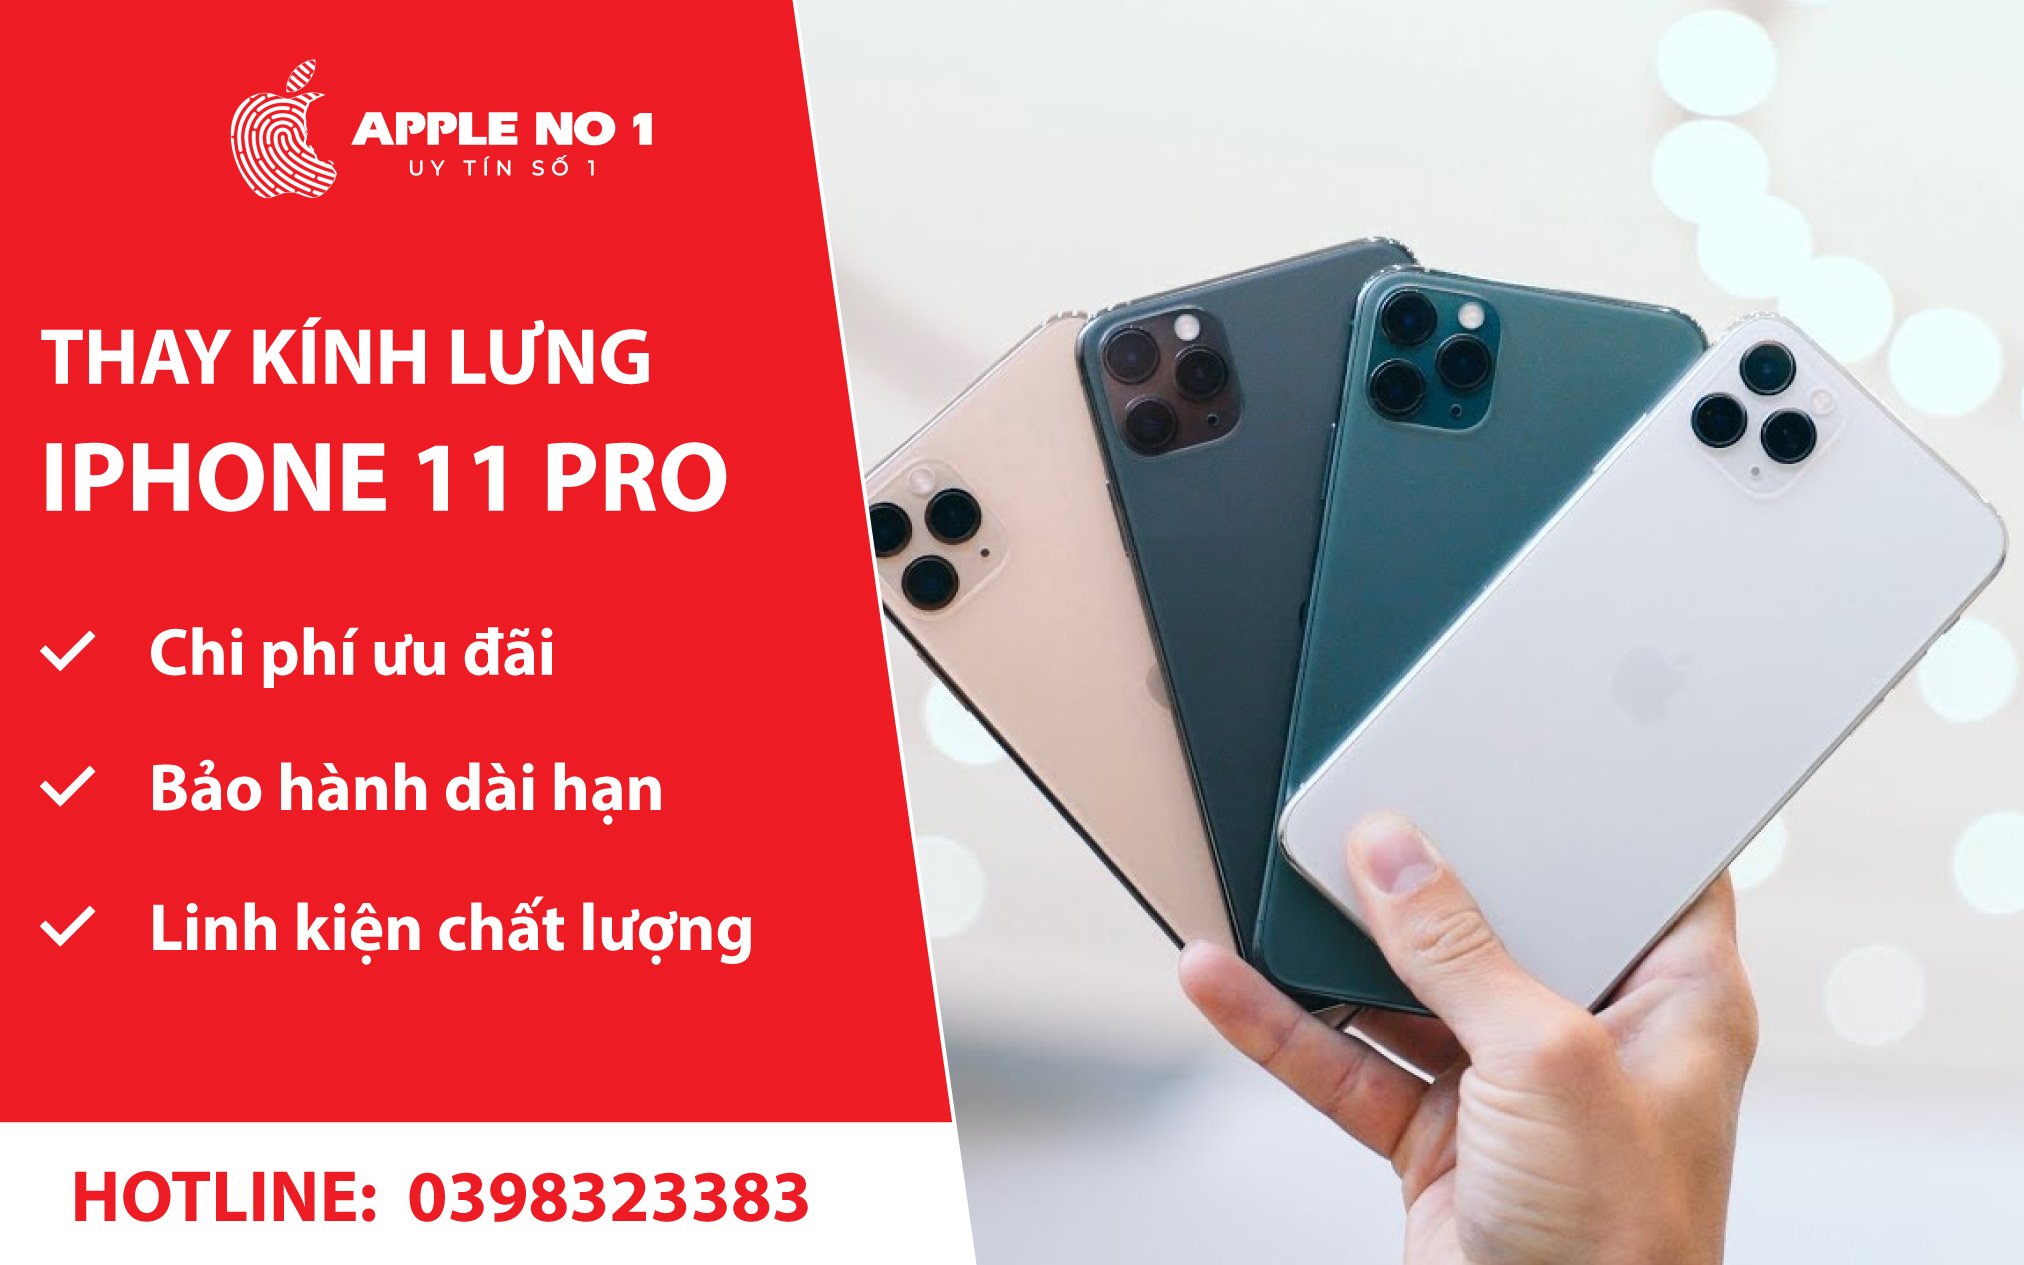 dich vu thay kinh luong iphone 11 pro chat luong cao tai apple no.1